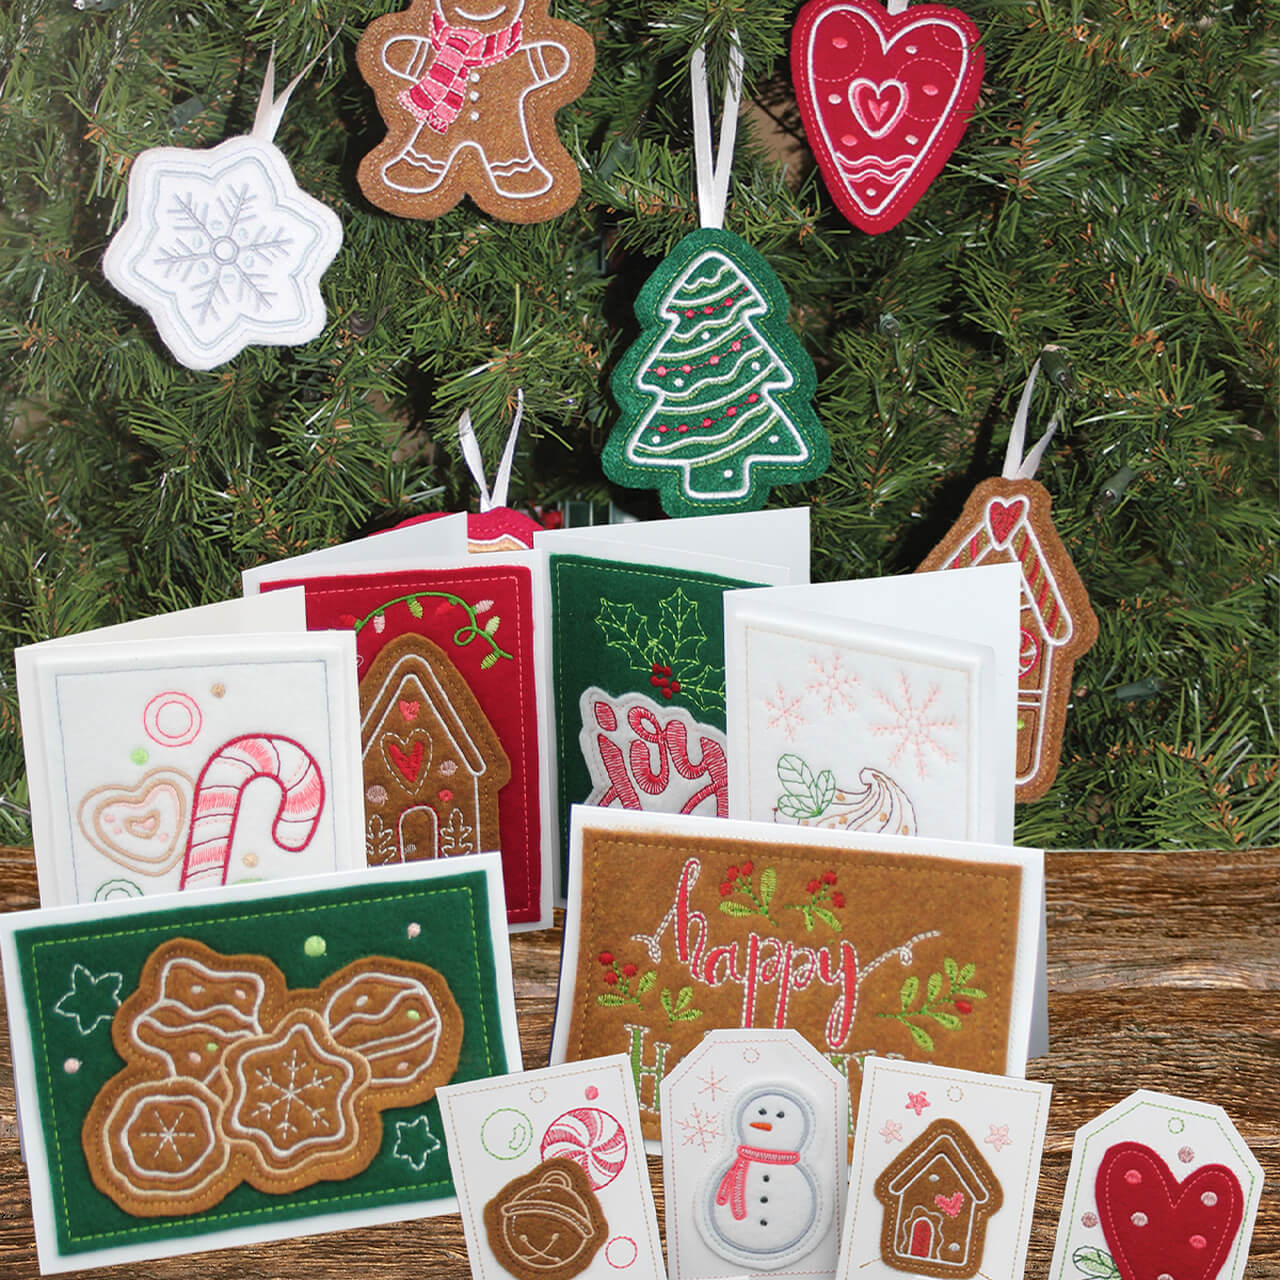 OESD's #12881 Warm & Cozy Greetings Embroidery Design Collection available at Nancy Zieman Productions at ShopNZP.com